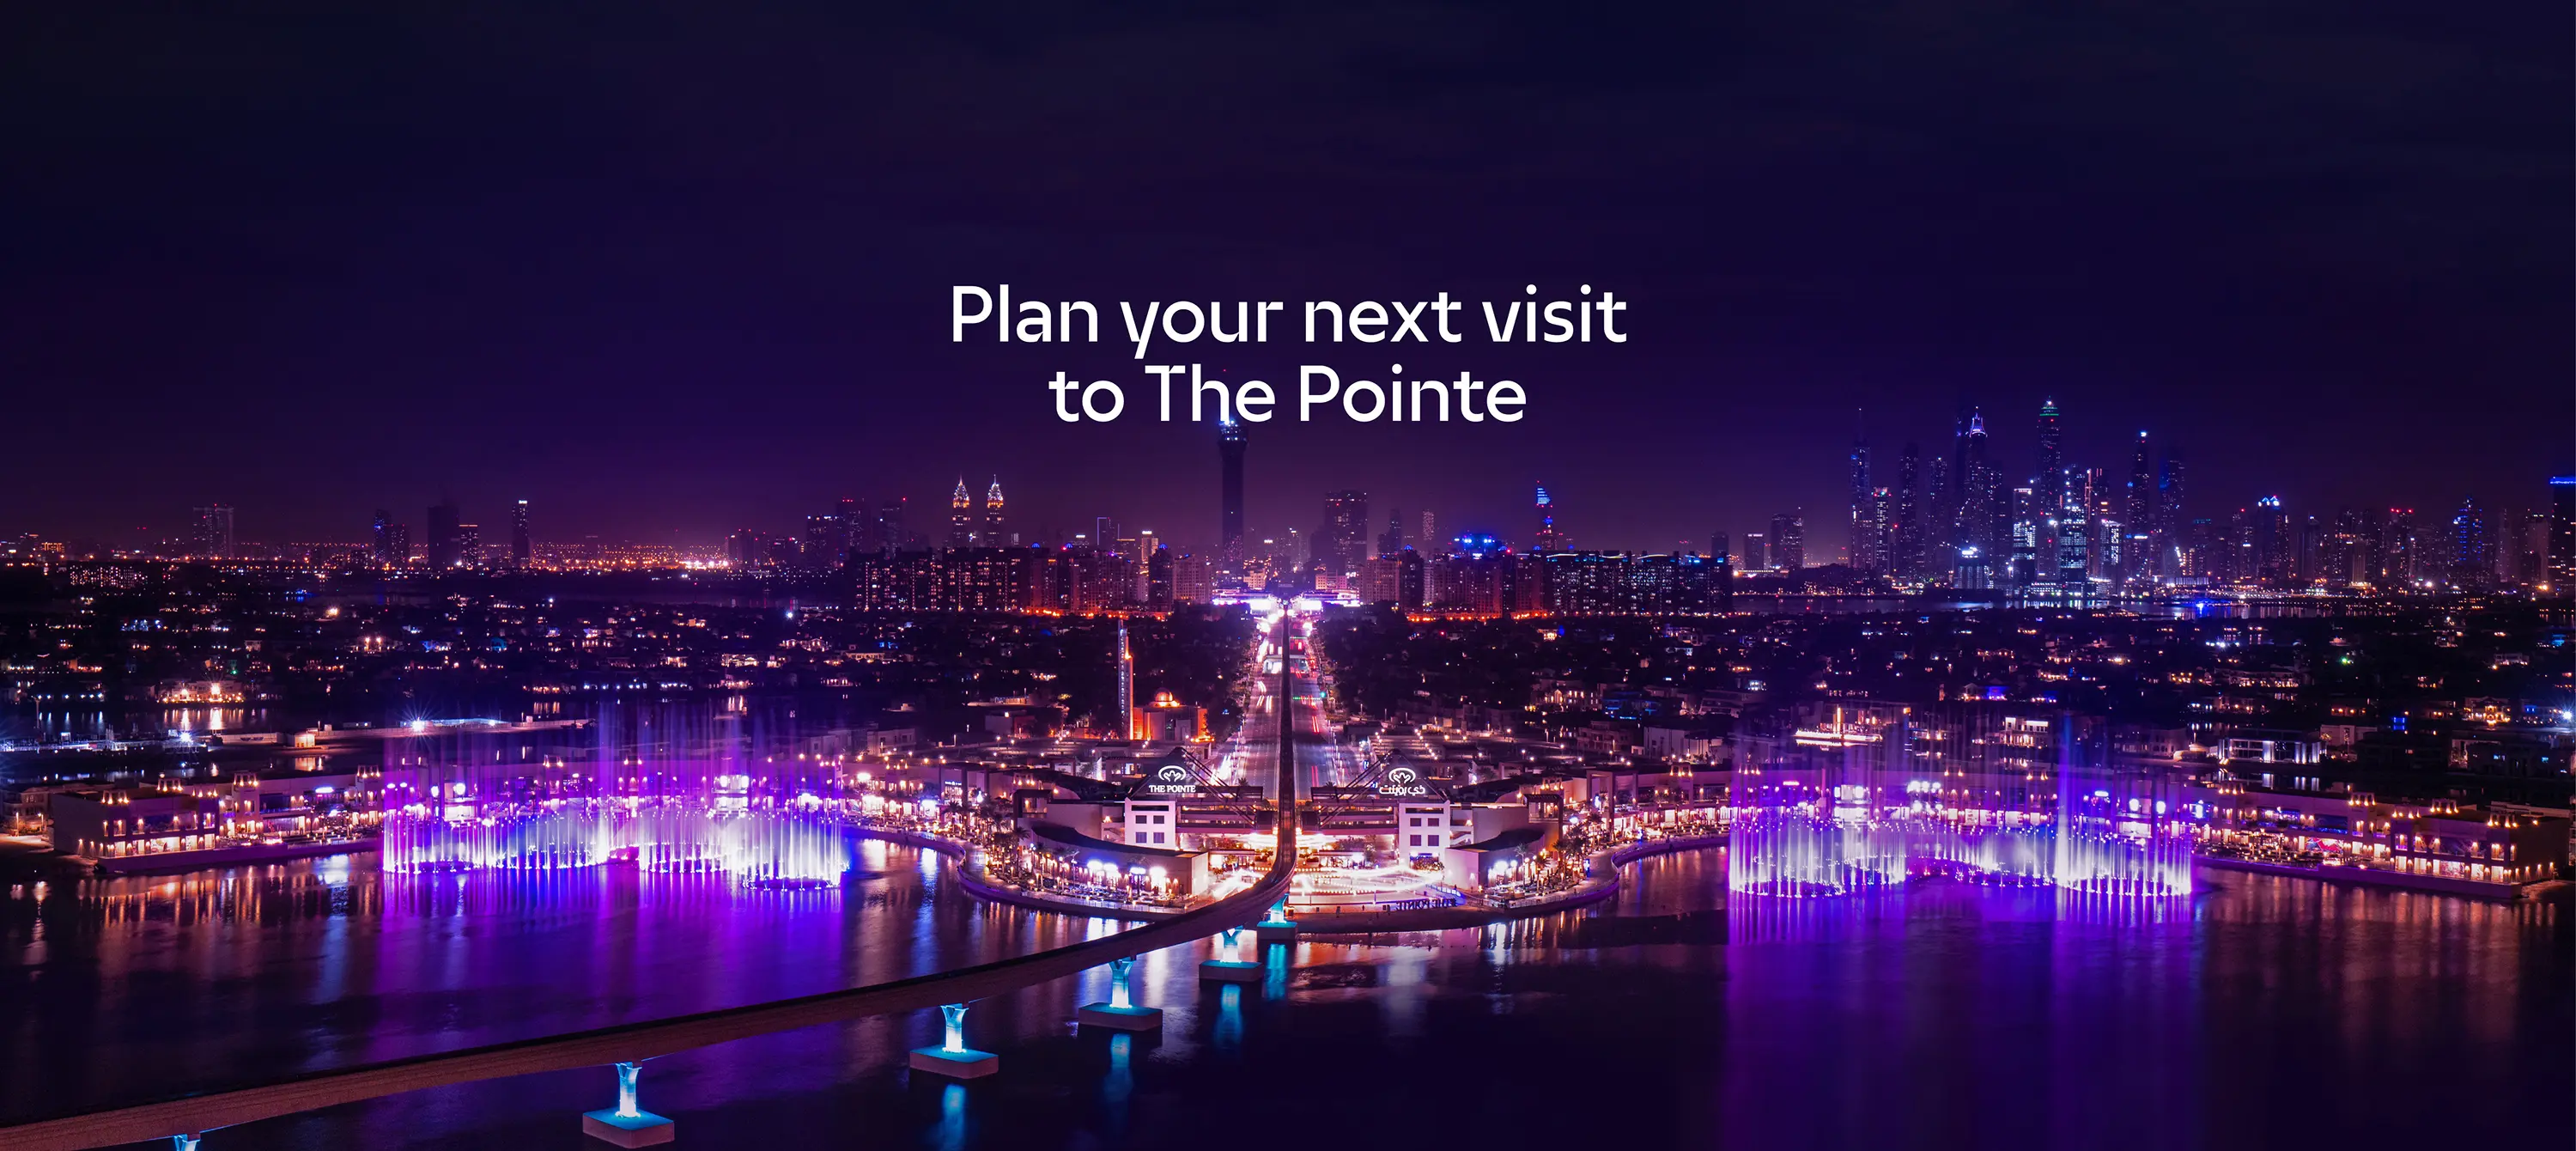 Plan your next visit to The Pointe